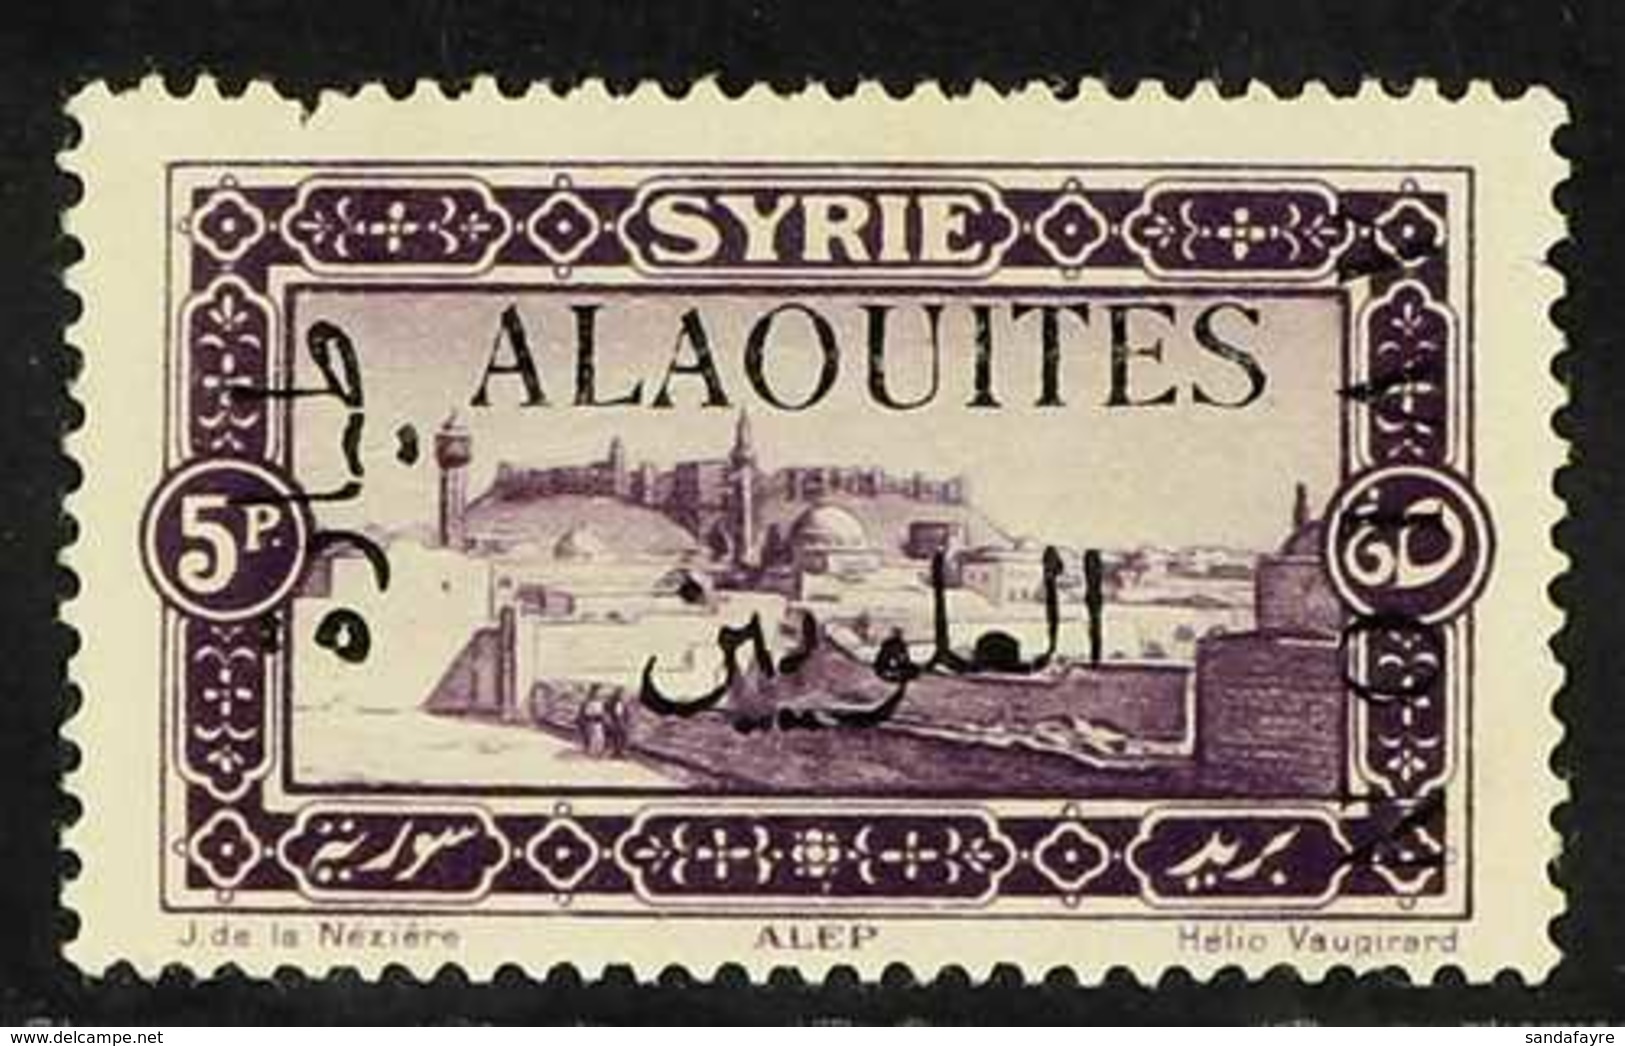 ALAOUITES 5pi Violet Air, Yv7, Variety "ovpt In Black, Avion To Right", Mint. Small Fault At Top. Cat €320 For More Imag - Siria